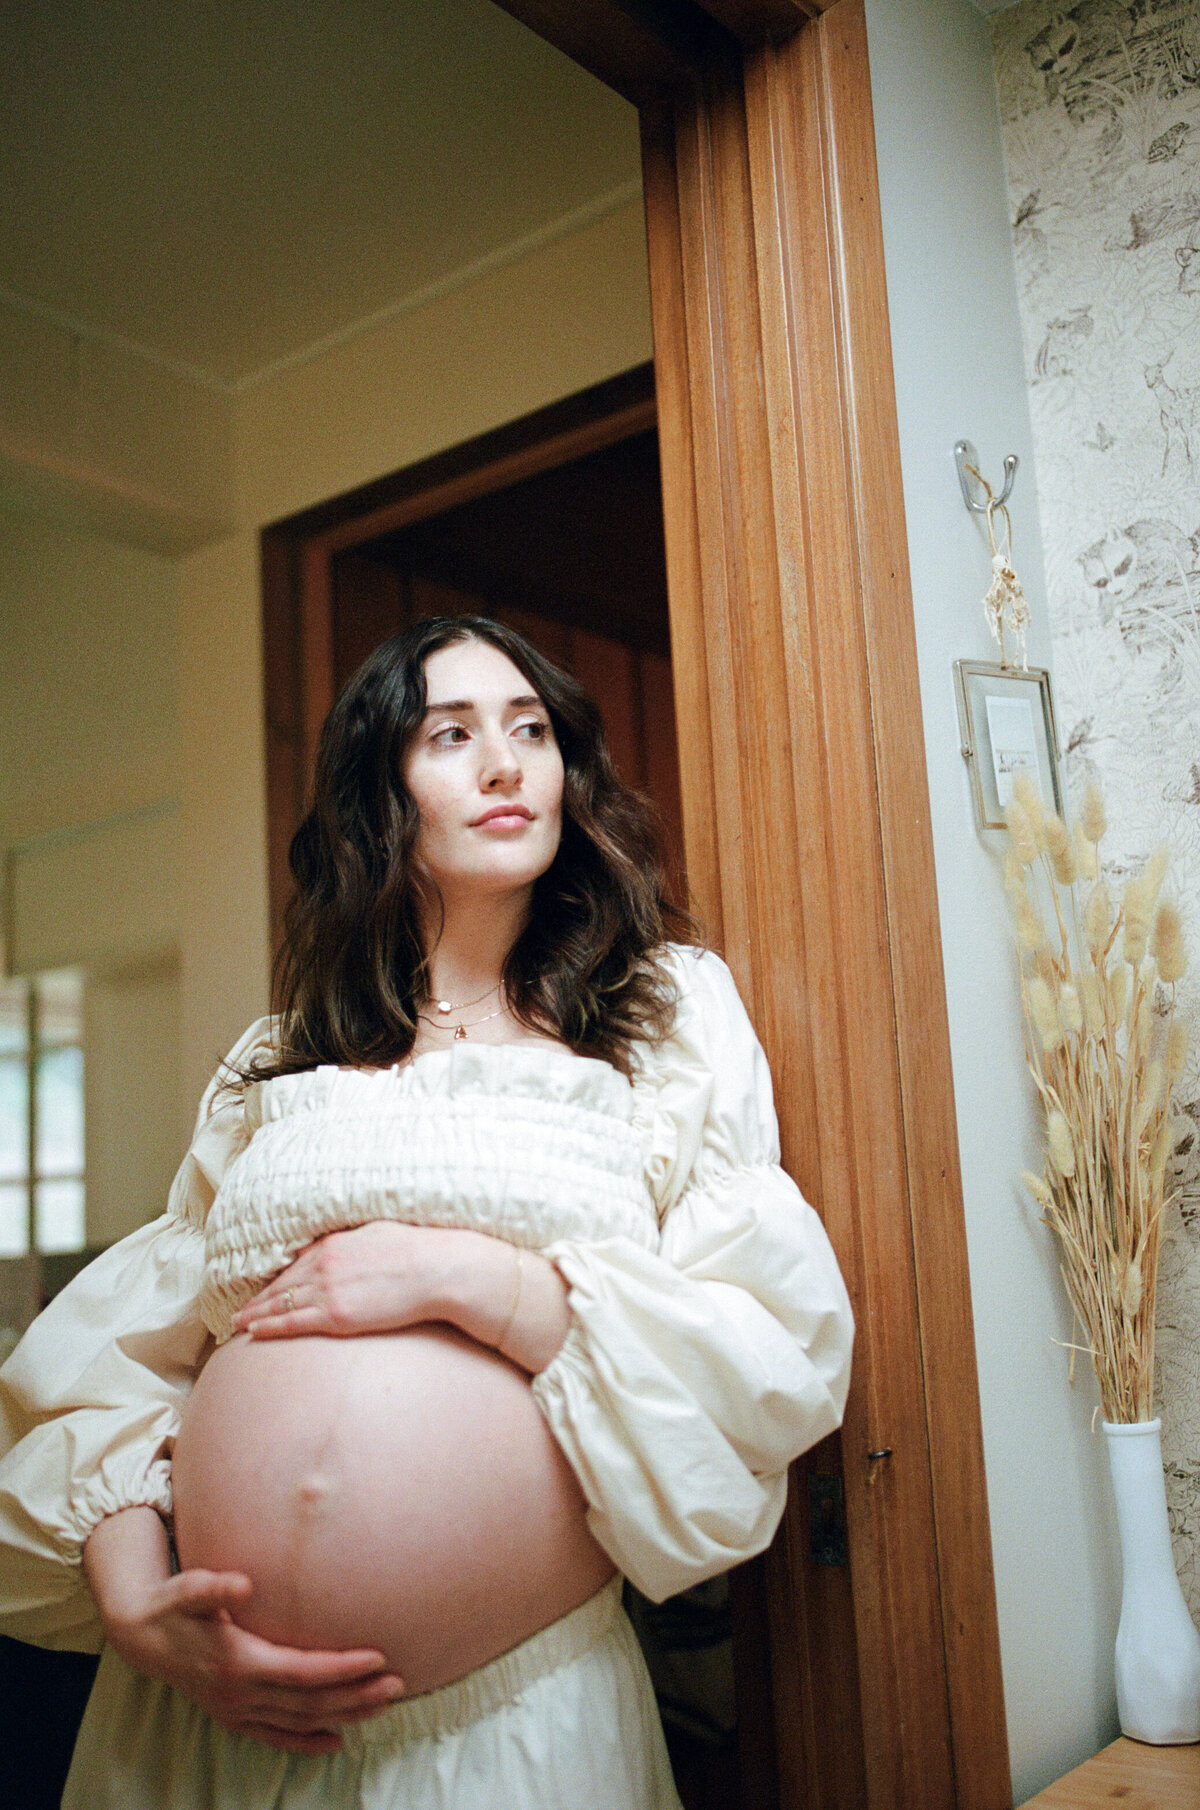 maternity-session-in-home-35mm-film-63